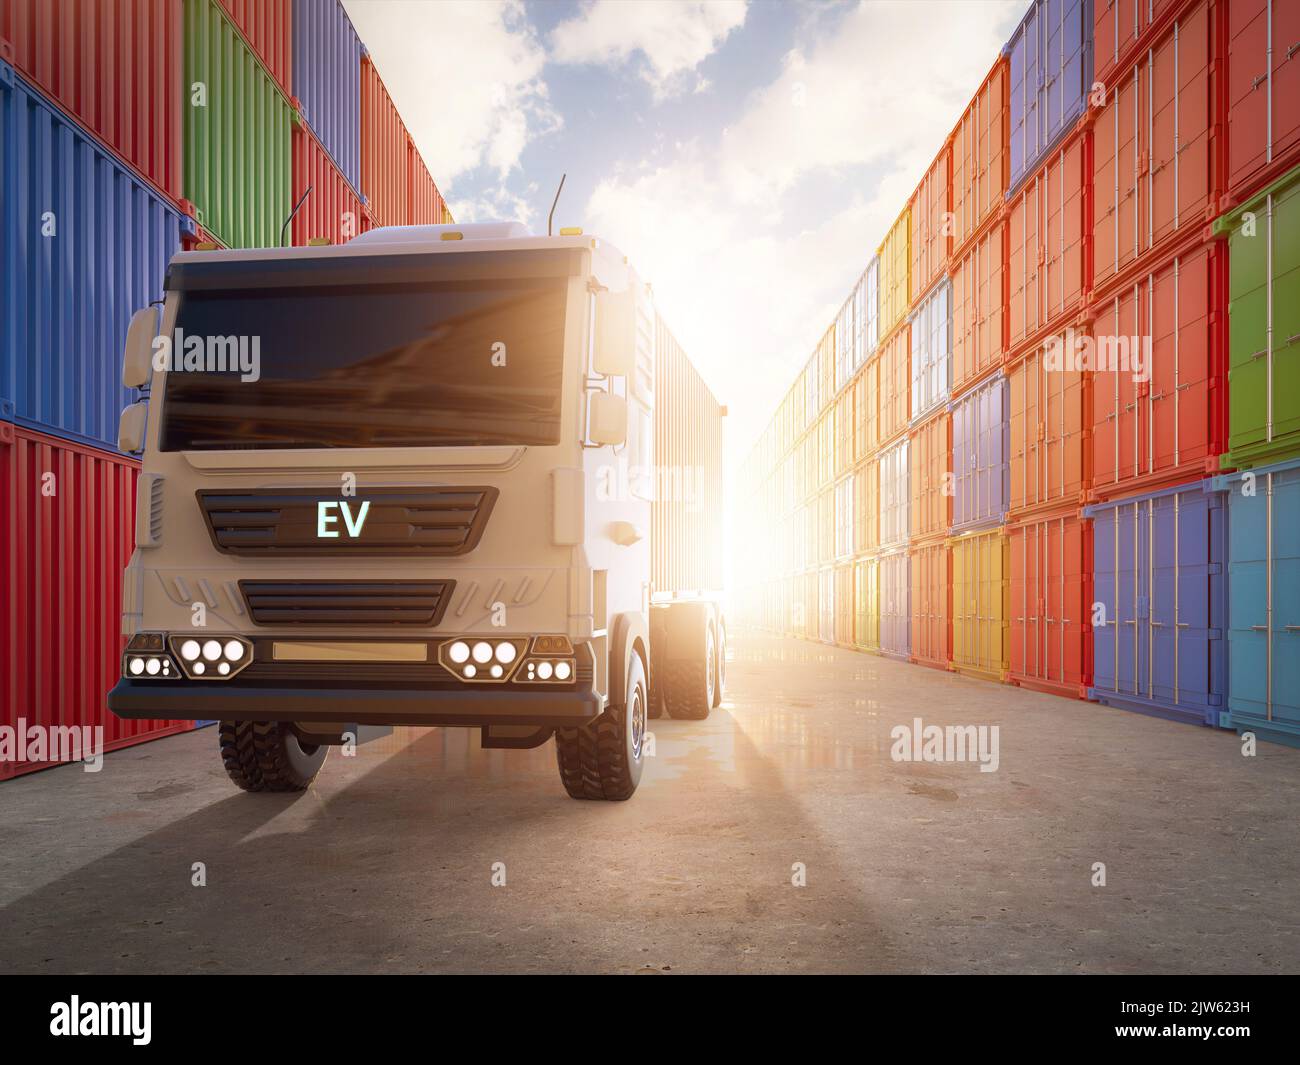 3d rendering ev logistic trailer truck or electric vehicle lorry at container terminal Stock Photo